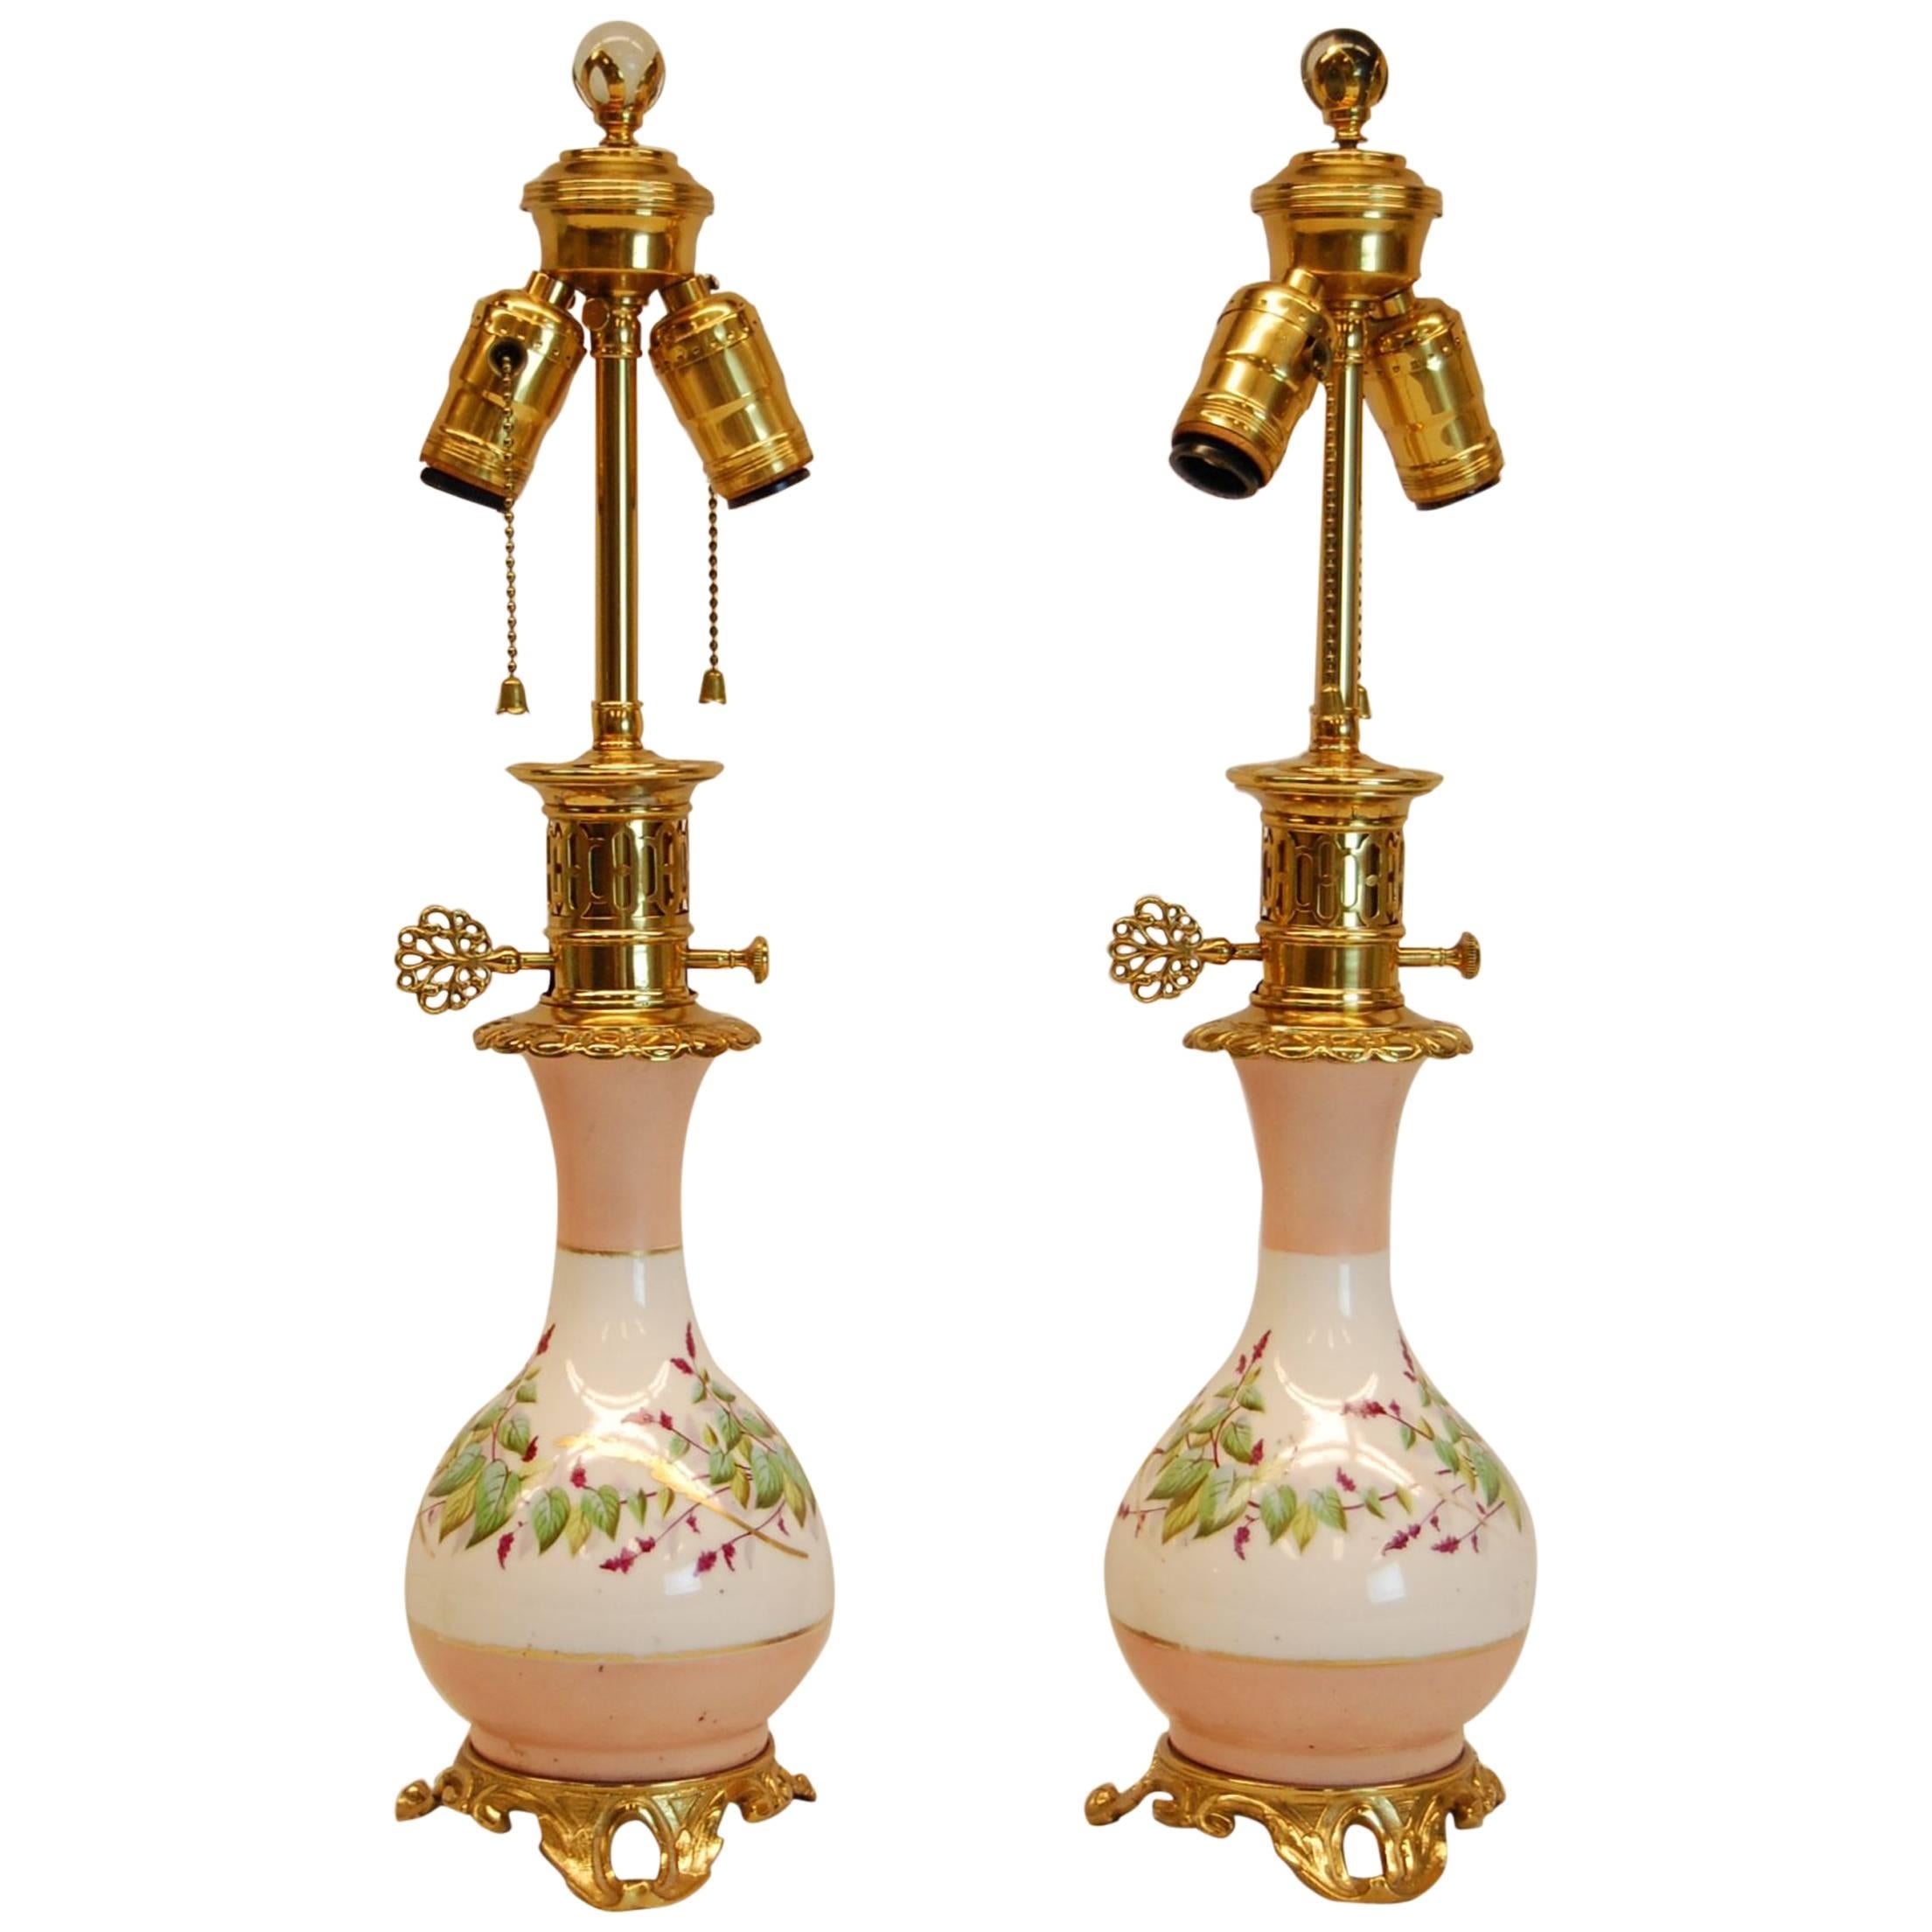 Pair of Mid 19th Century Porcelain Hand-Painted French or English Oil Lamps For Sale